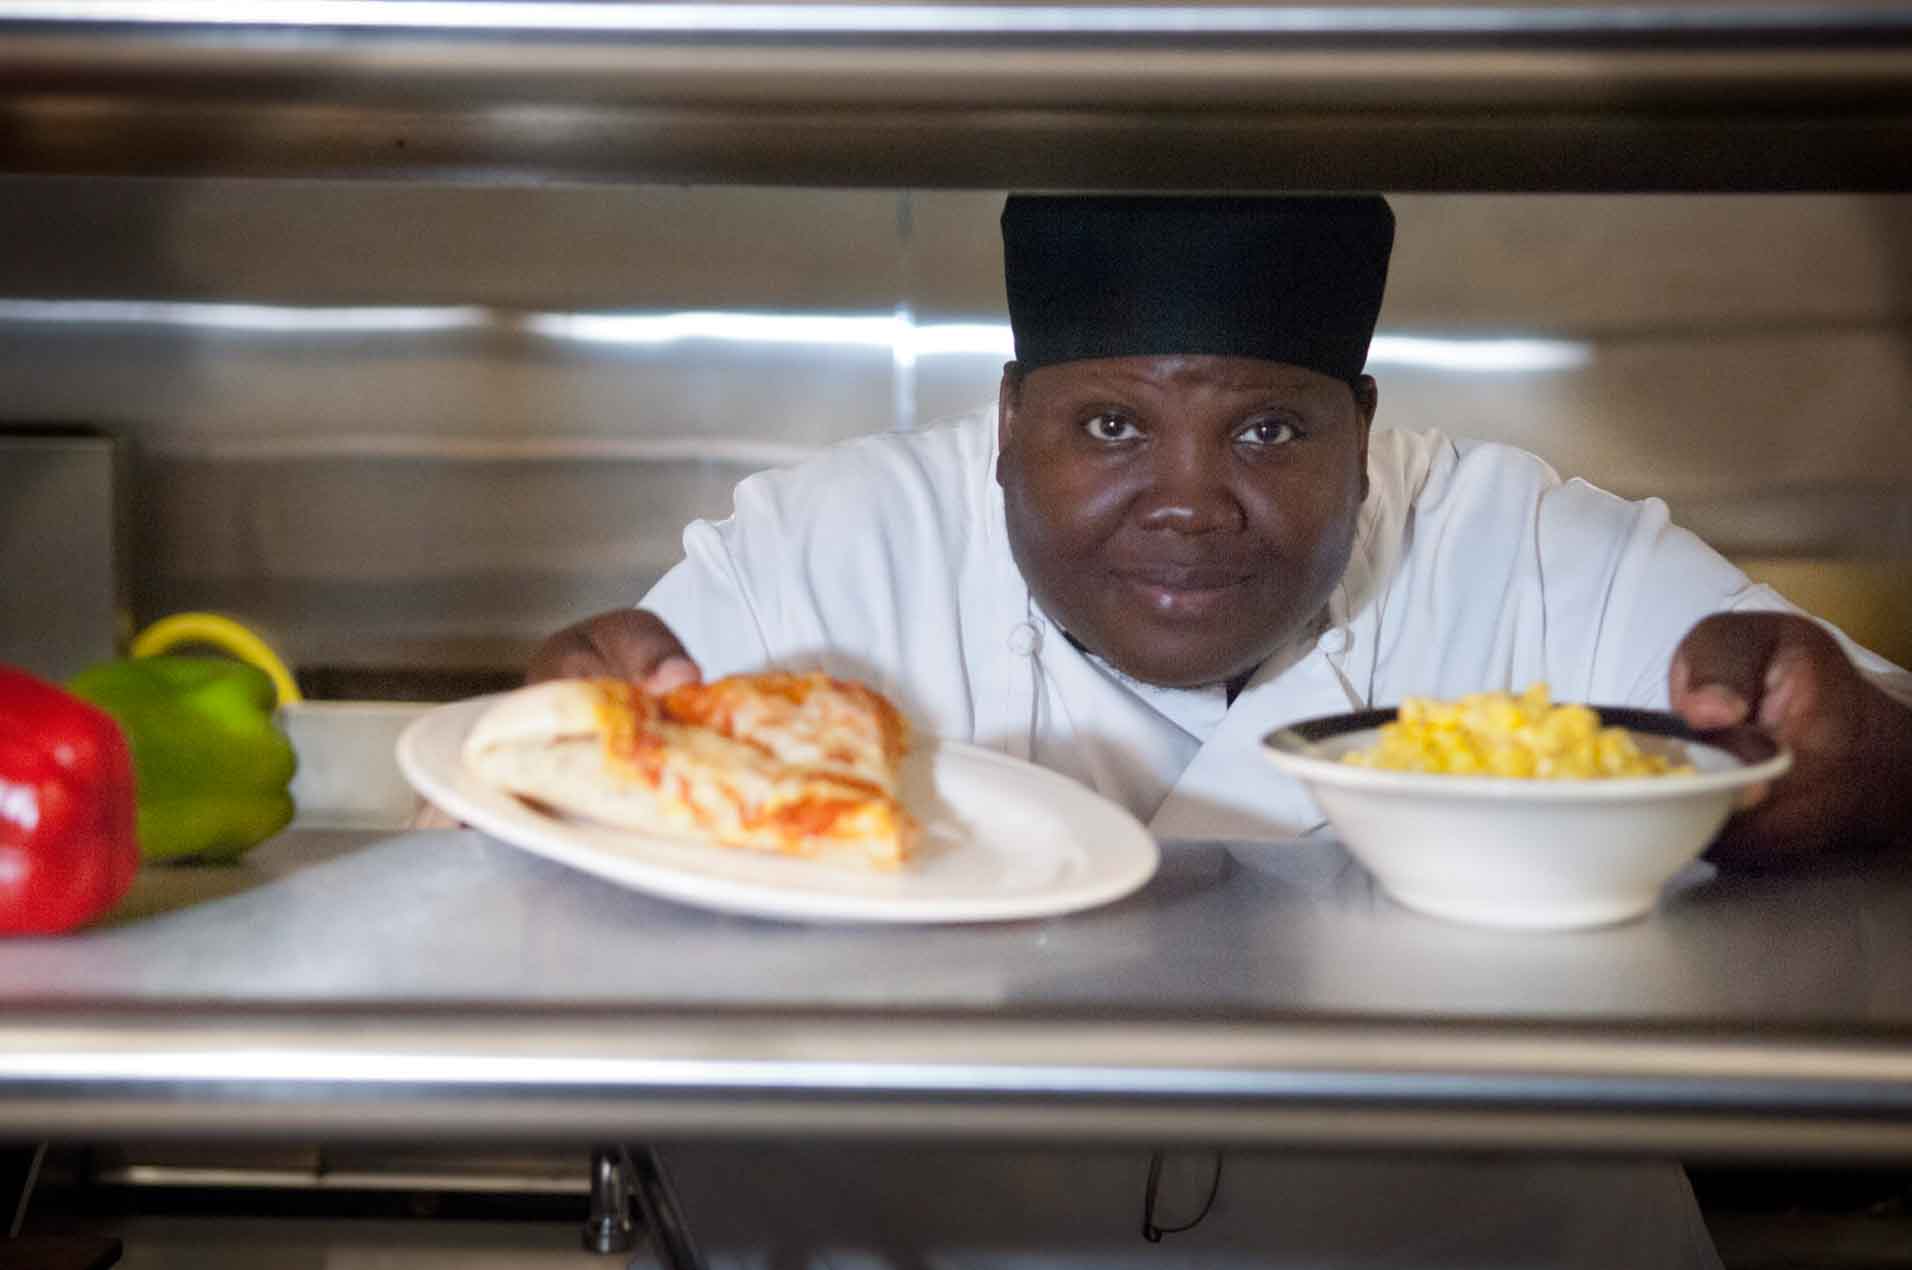 A woman in chef's clothing placing pizza and corn on a counter.